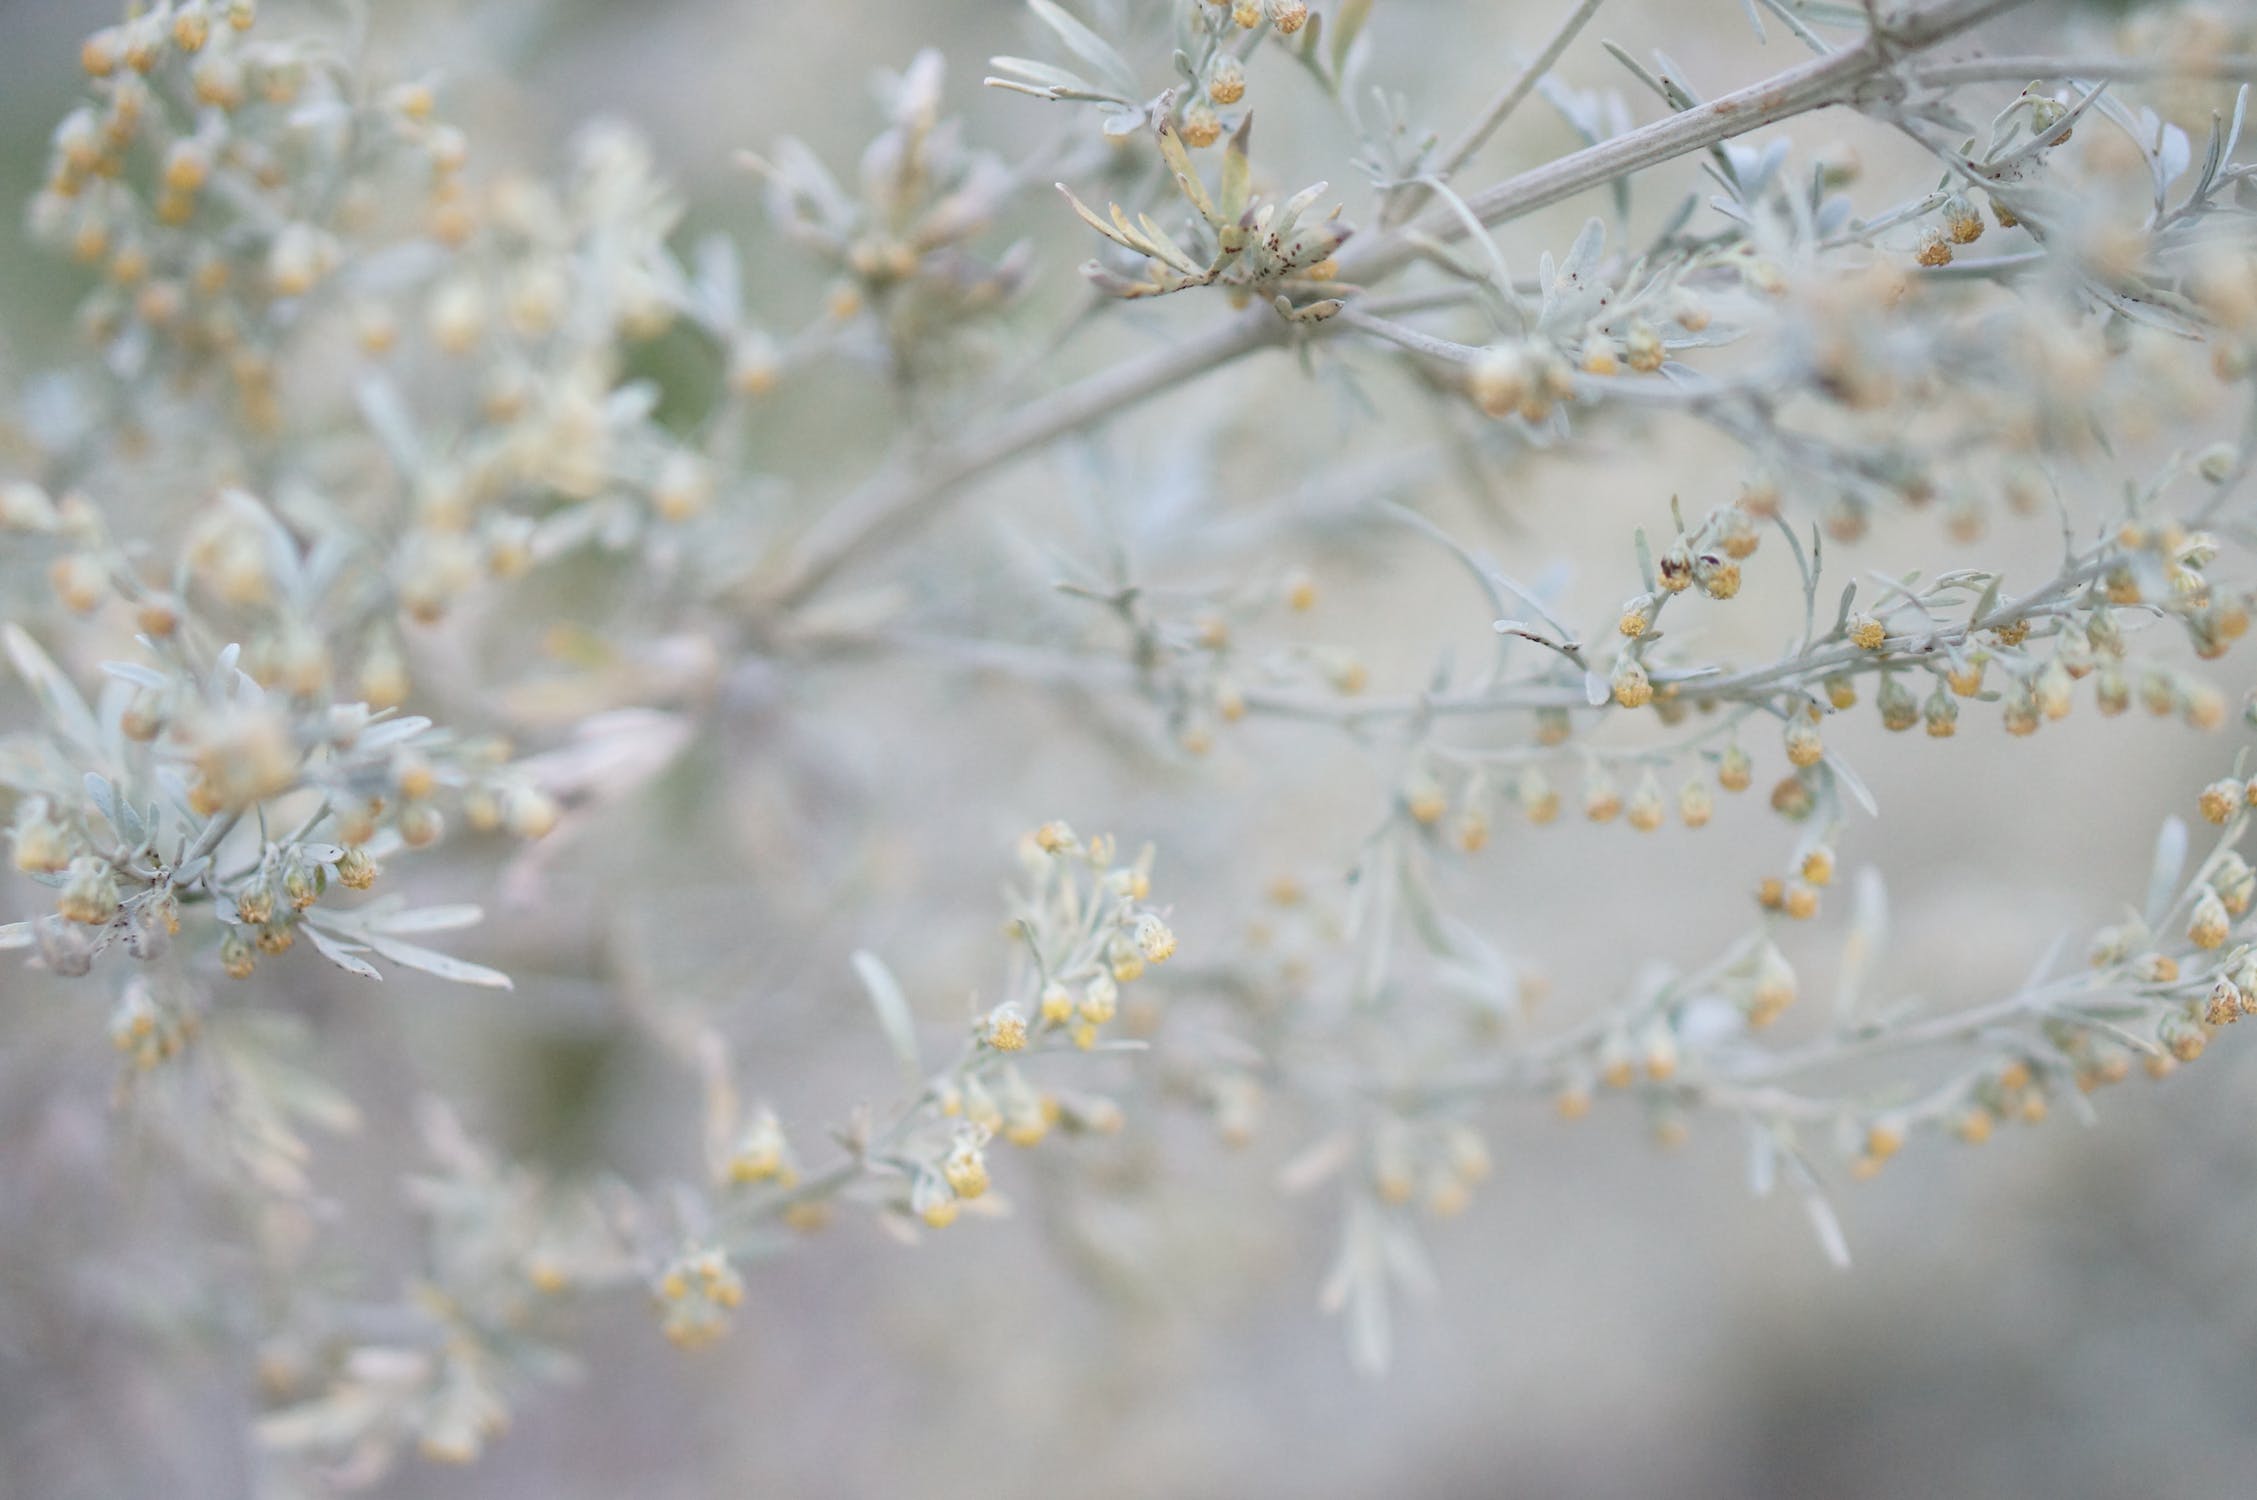 Common Wormwood Plant in Close-Up Photography 